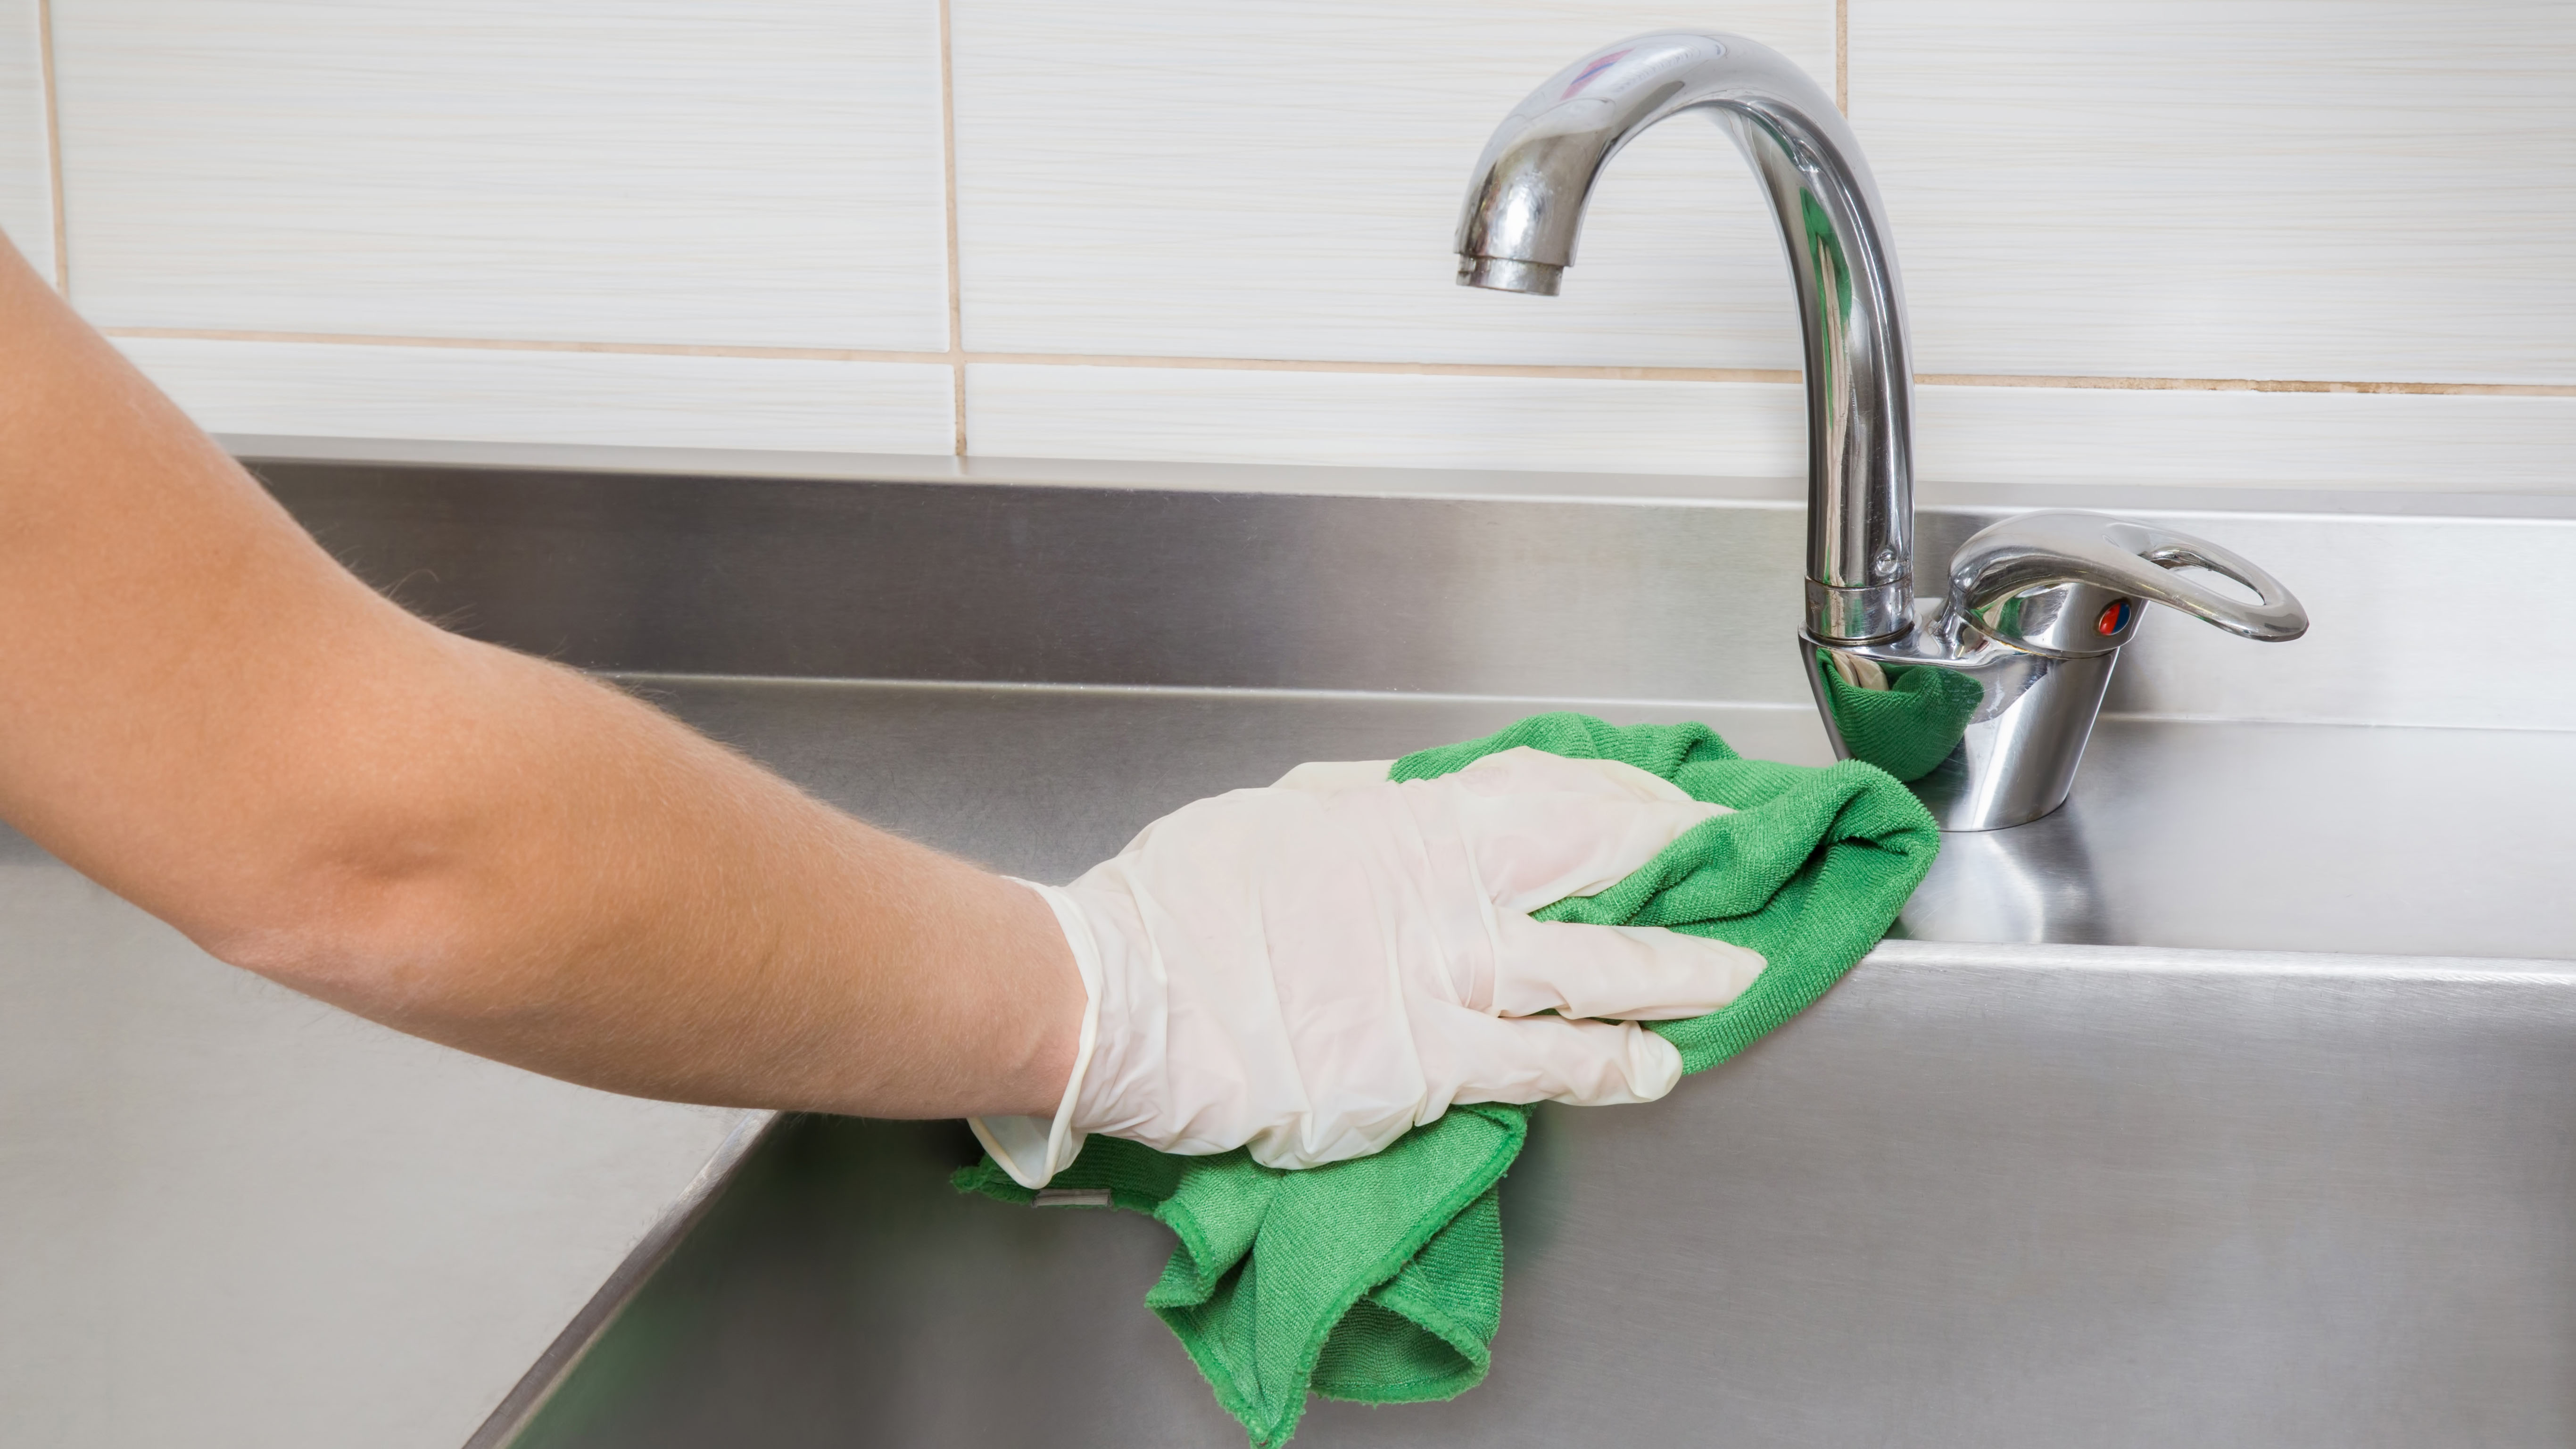 A stainless steel sink being cleaned with a cloth while wearing gloves